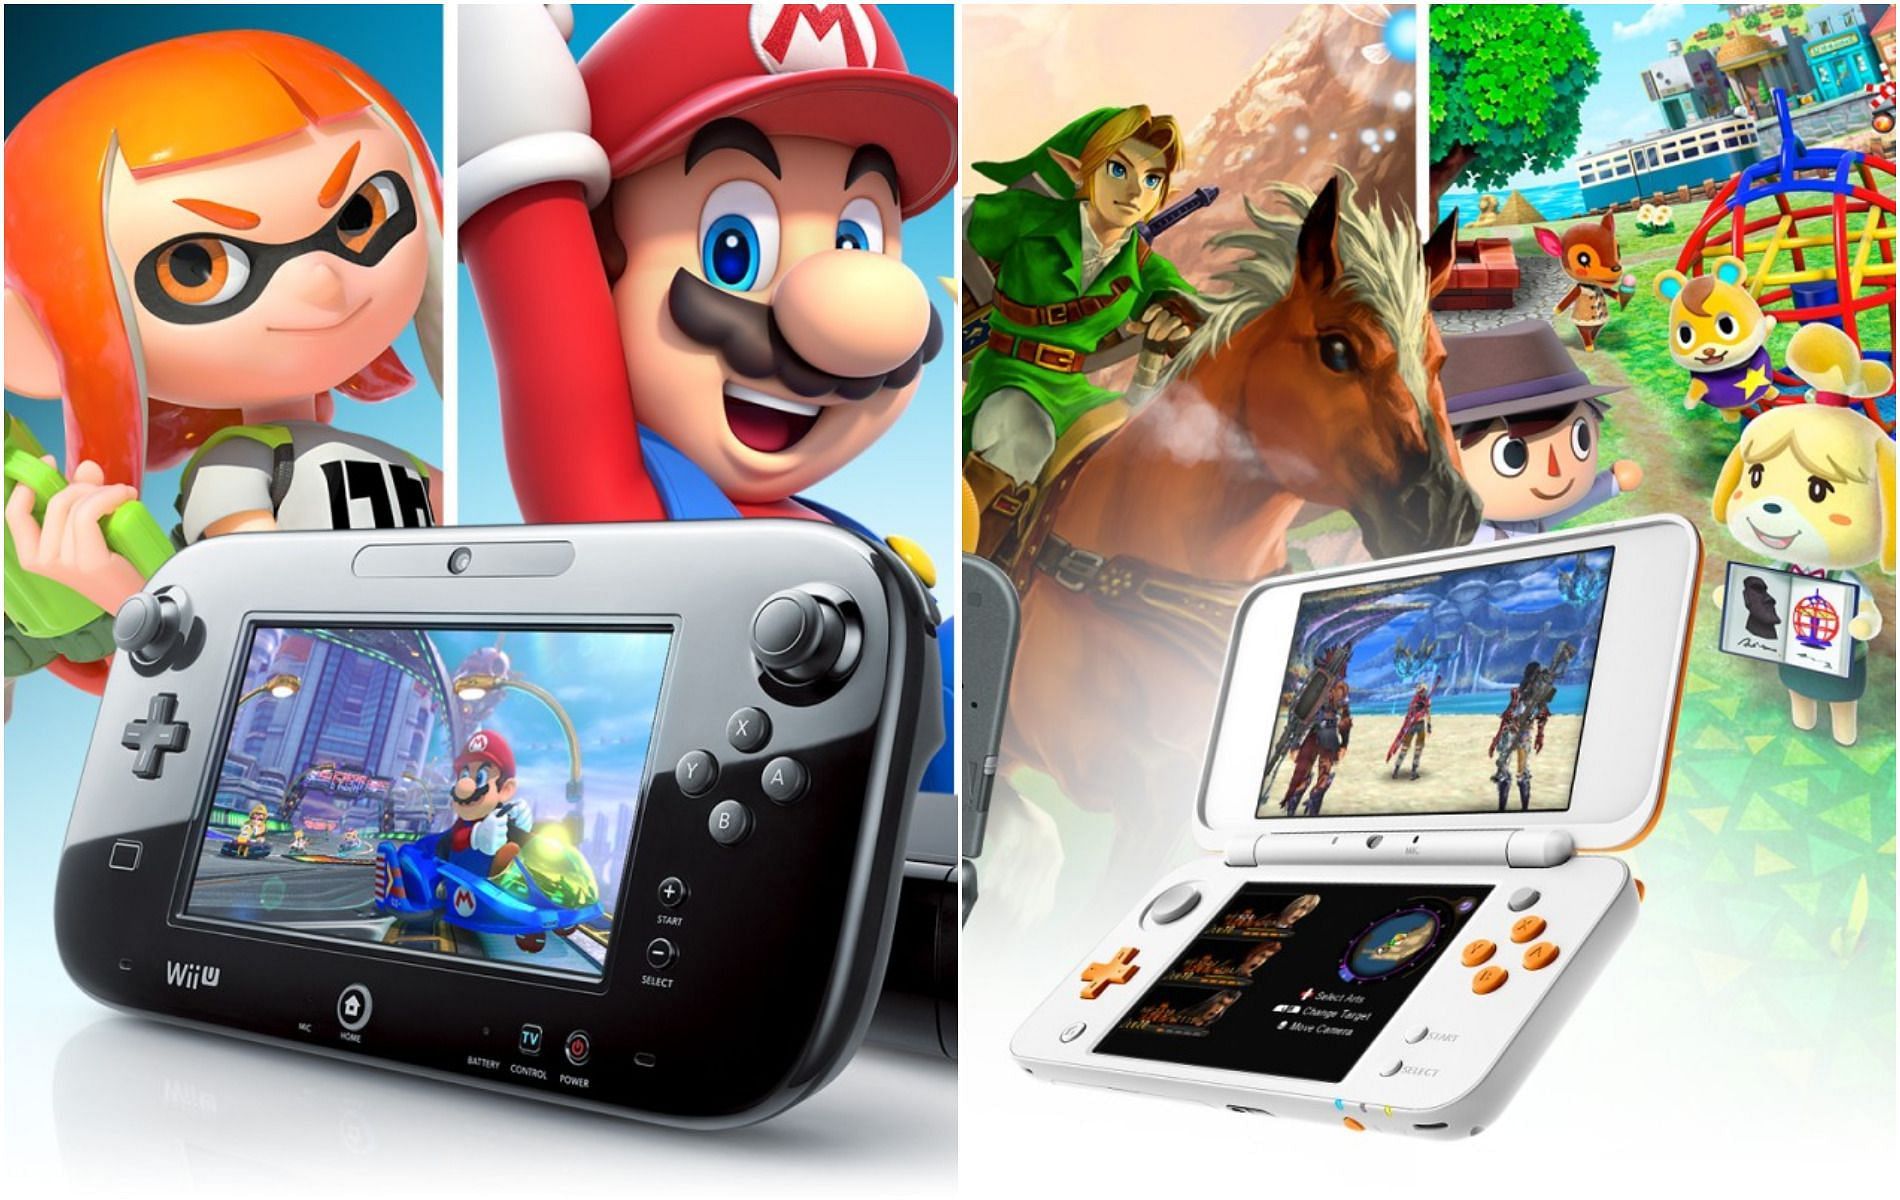 Wii U and Nintendo 3DS eShop purchases to end in March